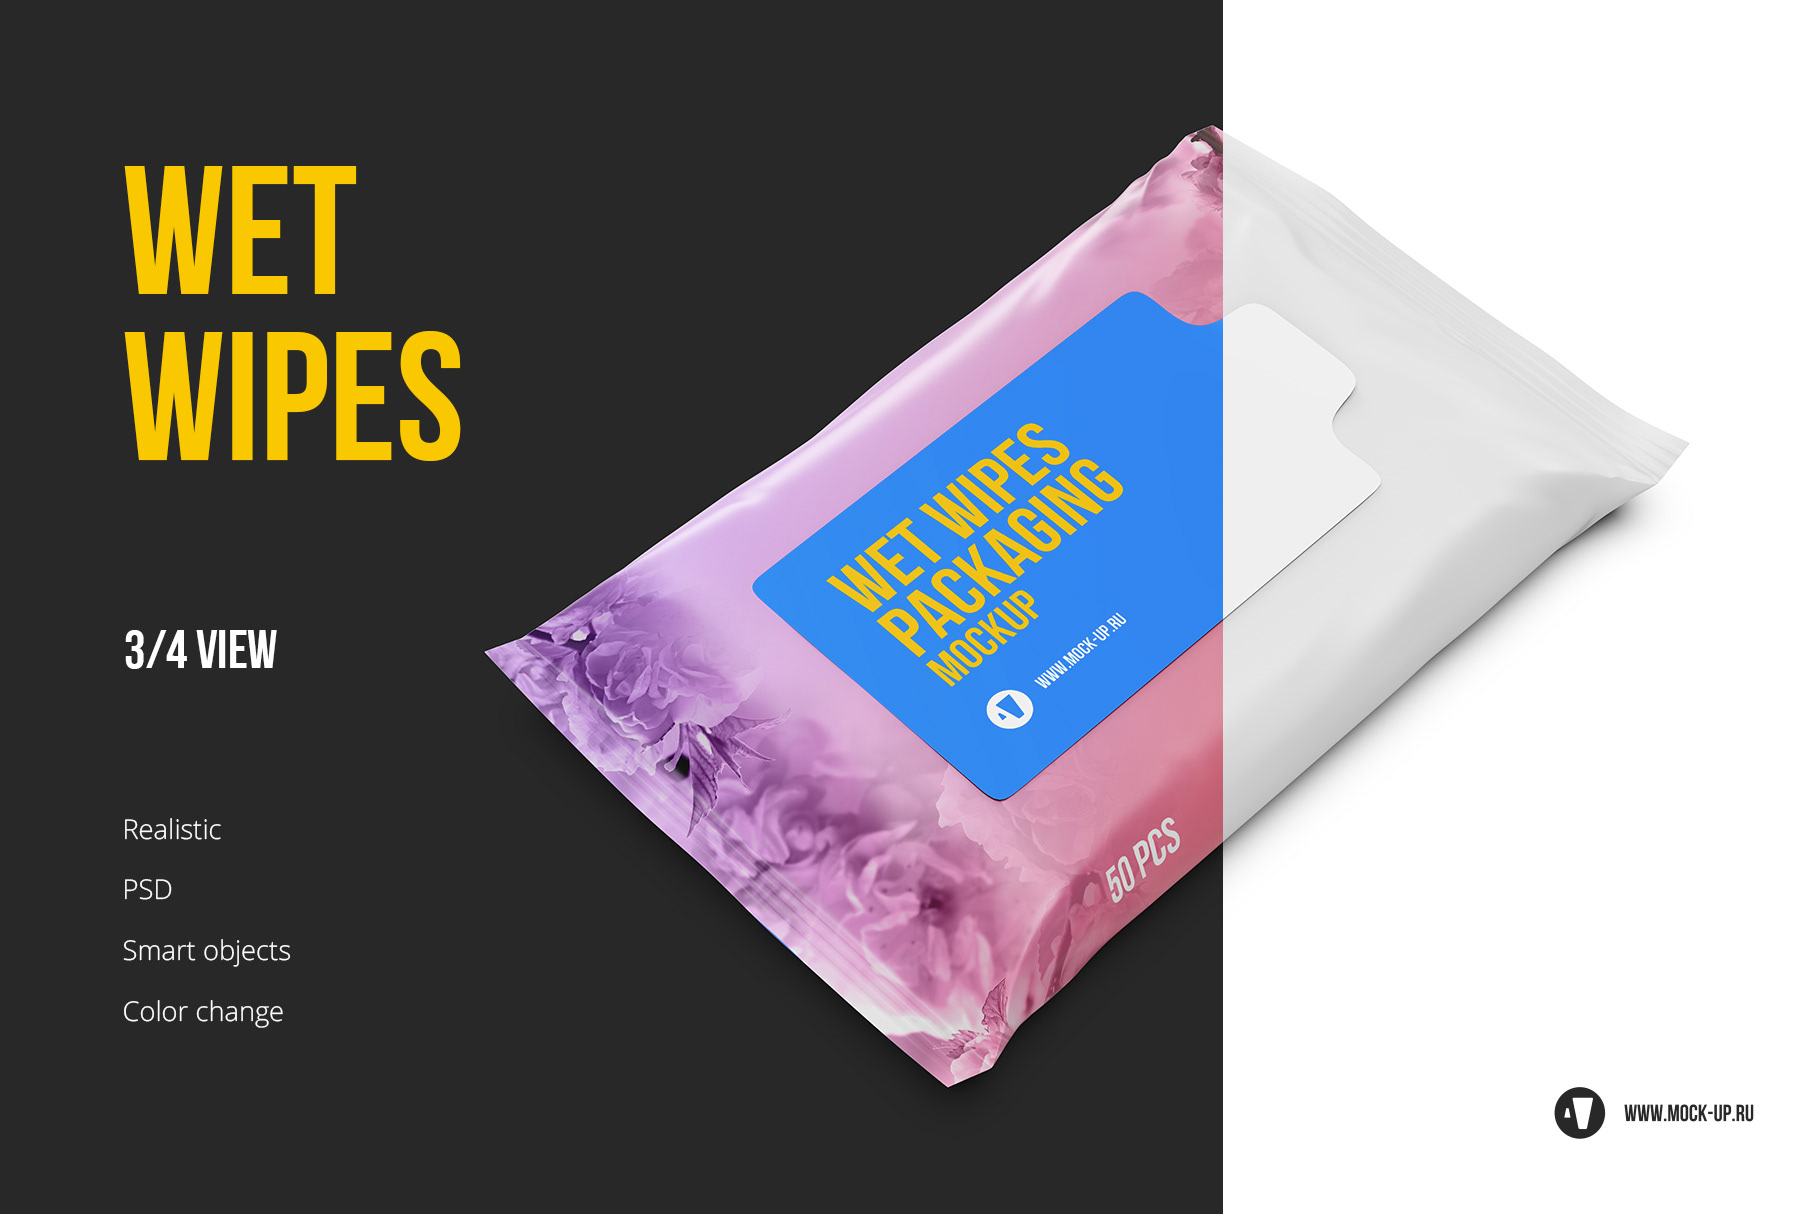 Download Exclusive Product Mockups Wet Wipes 3 4 View Mockup